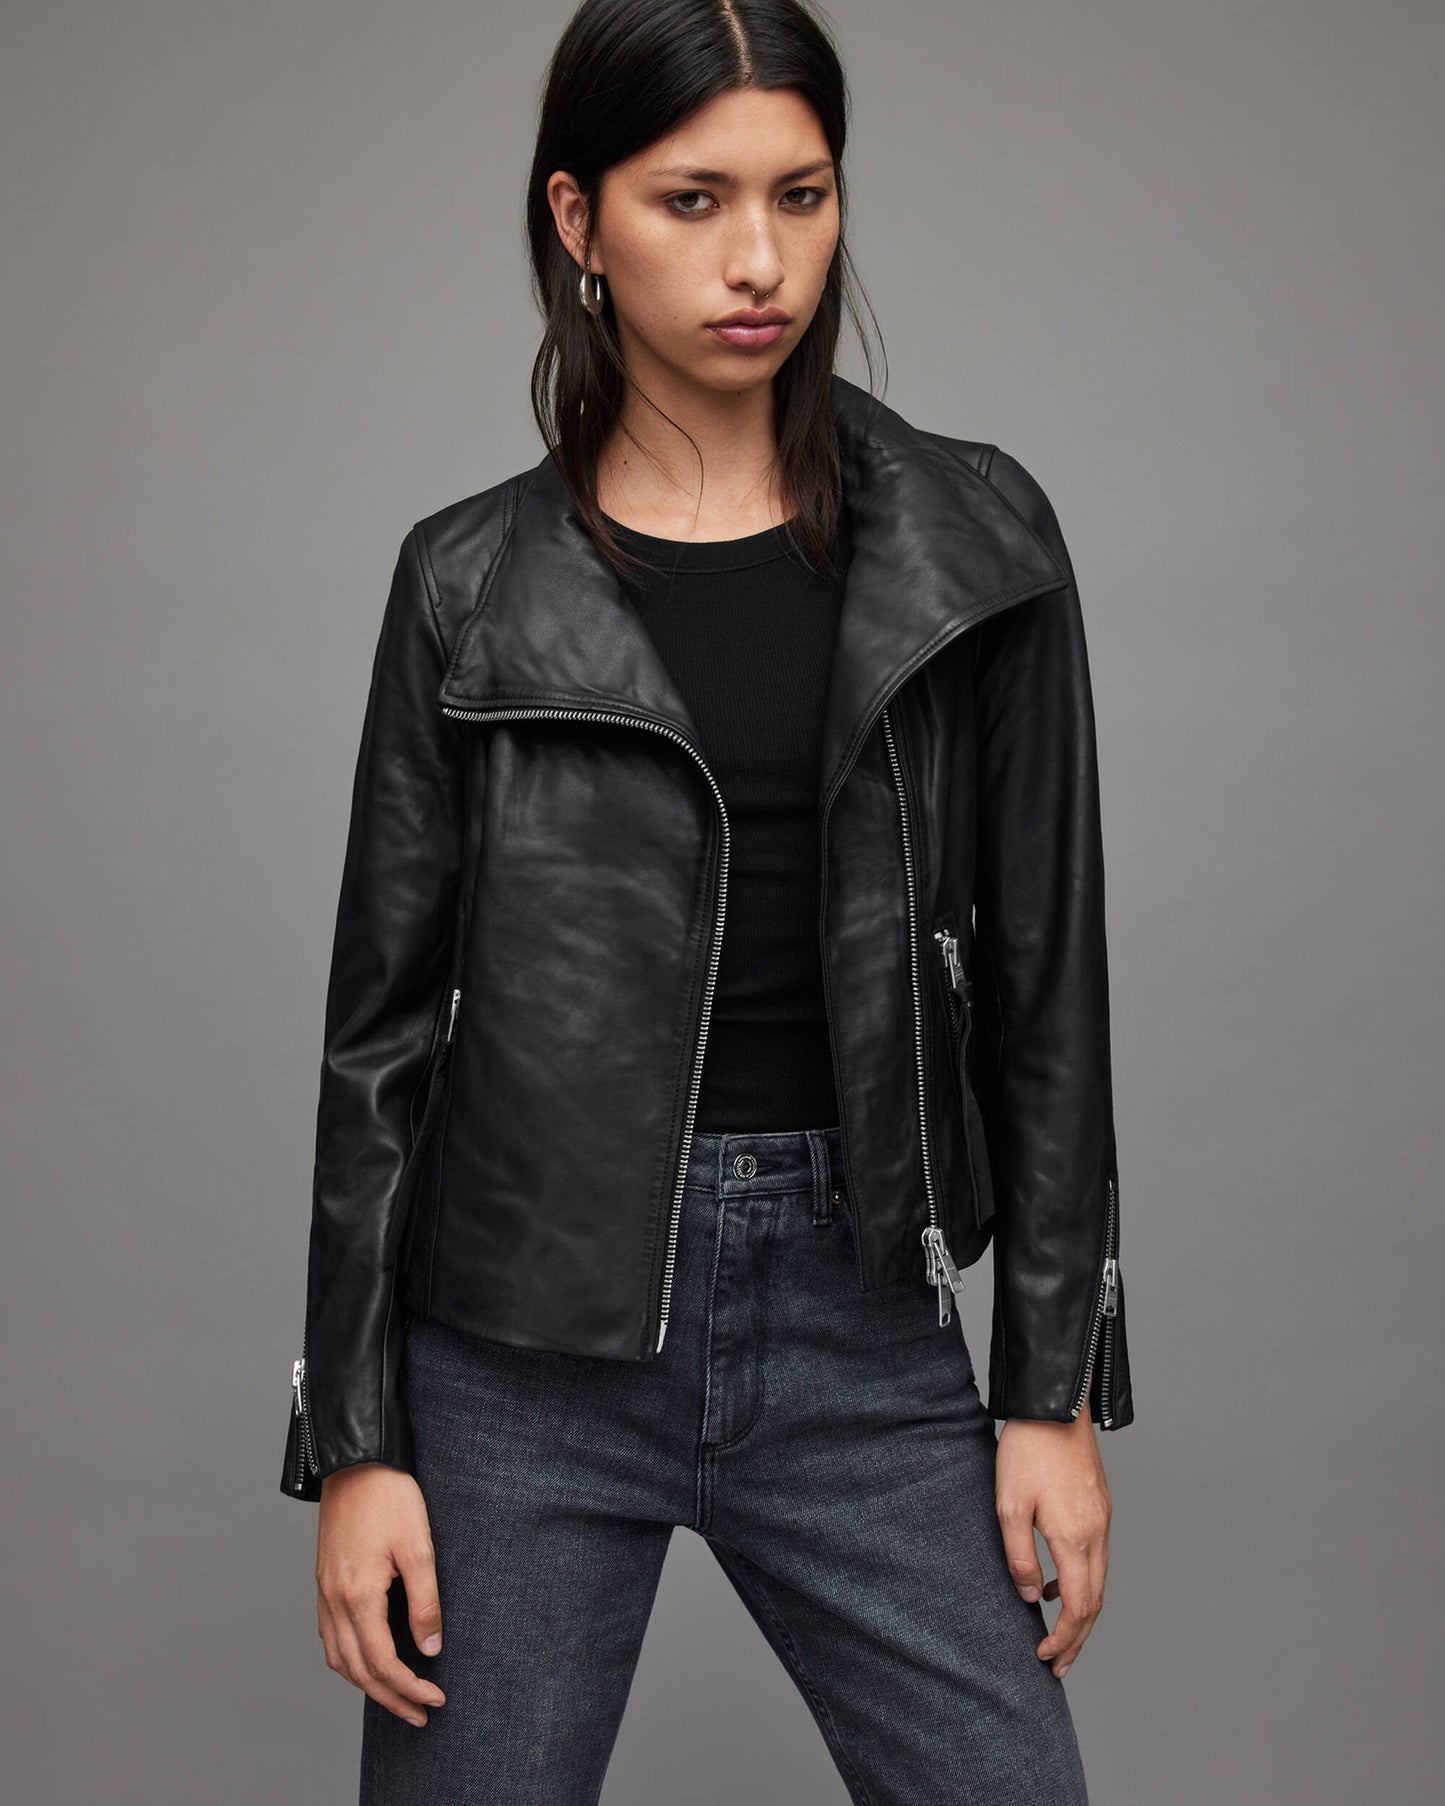 Women's Leather Biker Jacket In Black With Wing Collar